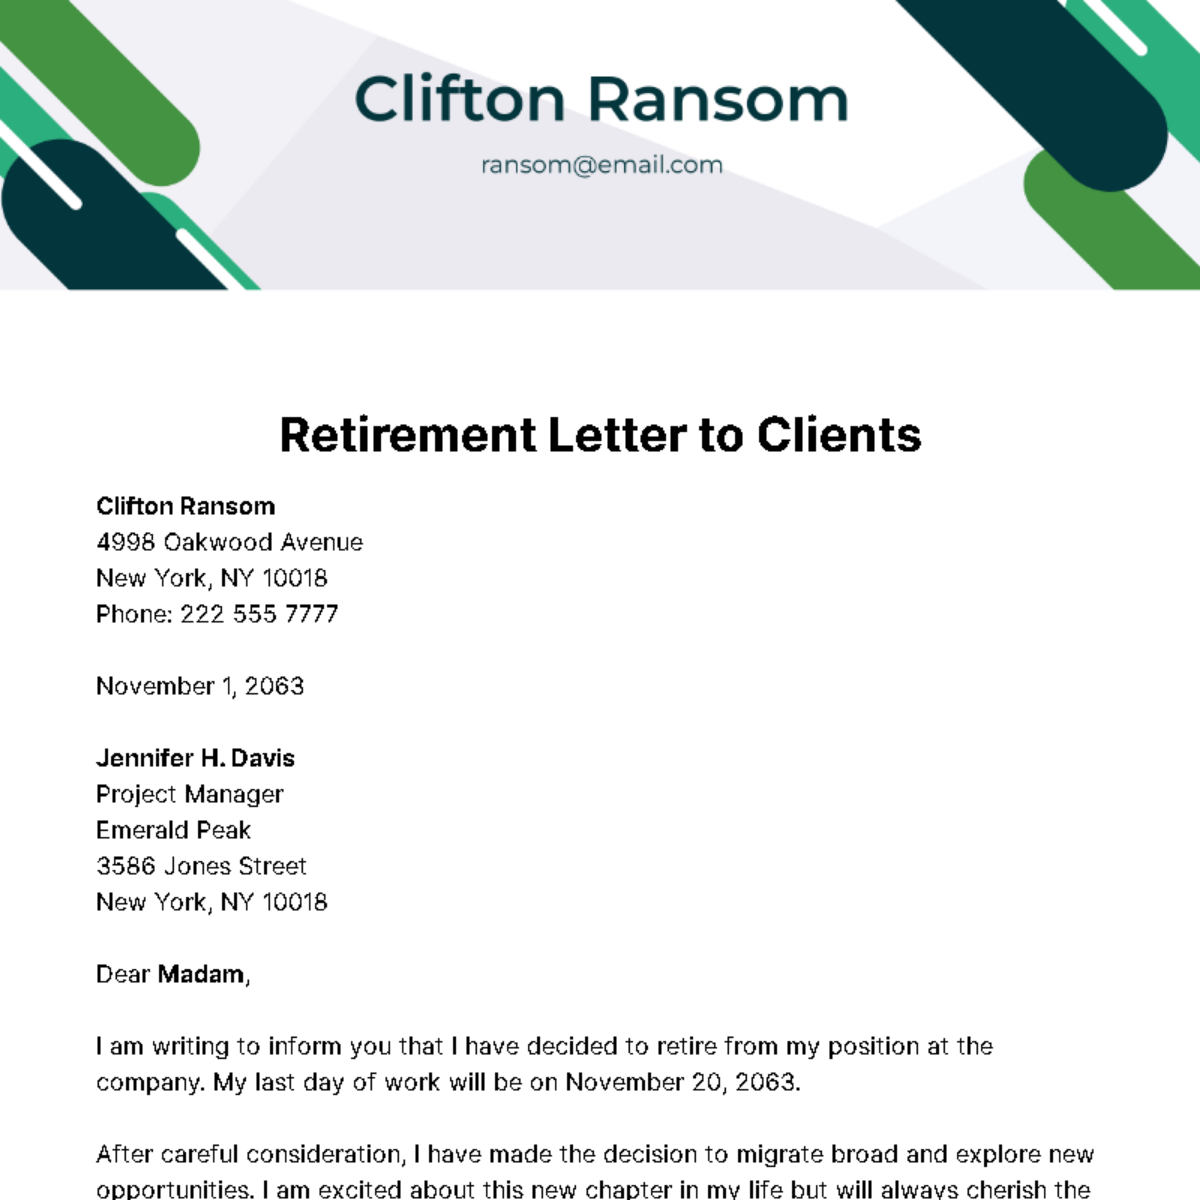 Retirement Letter to Clients Template